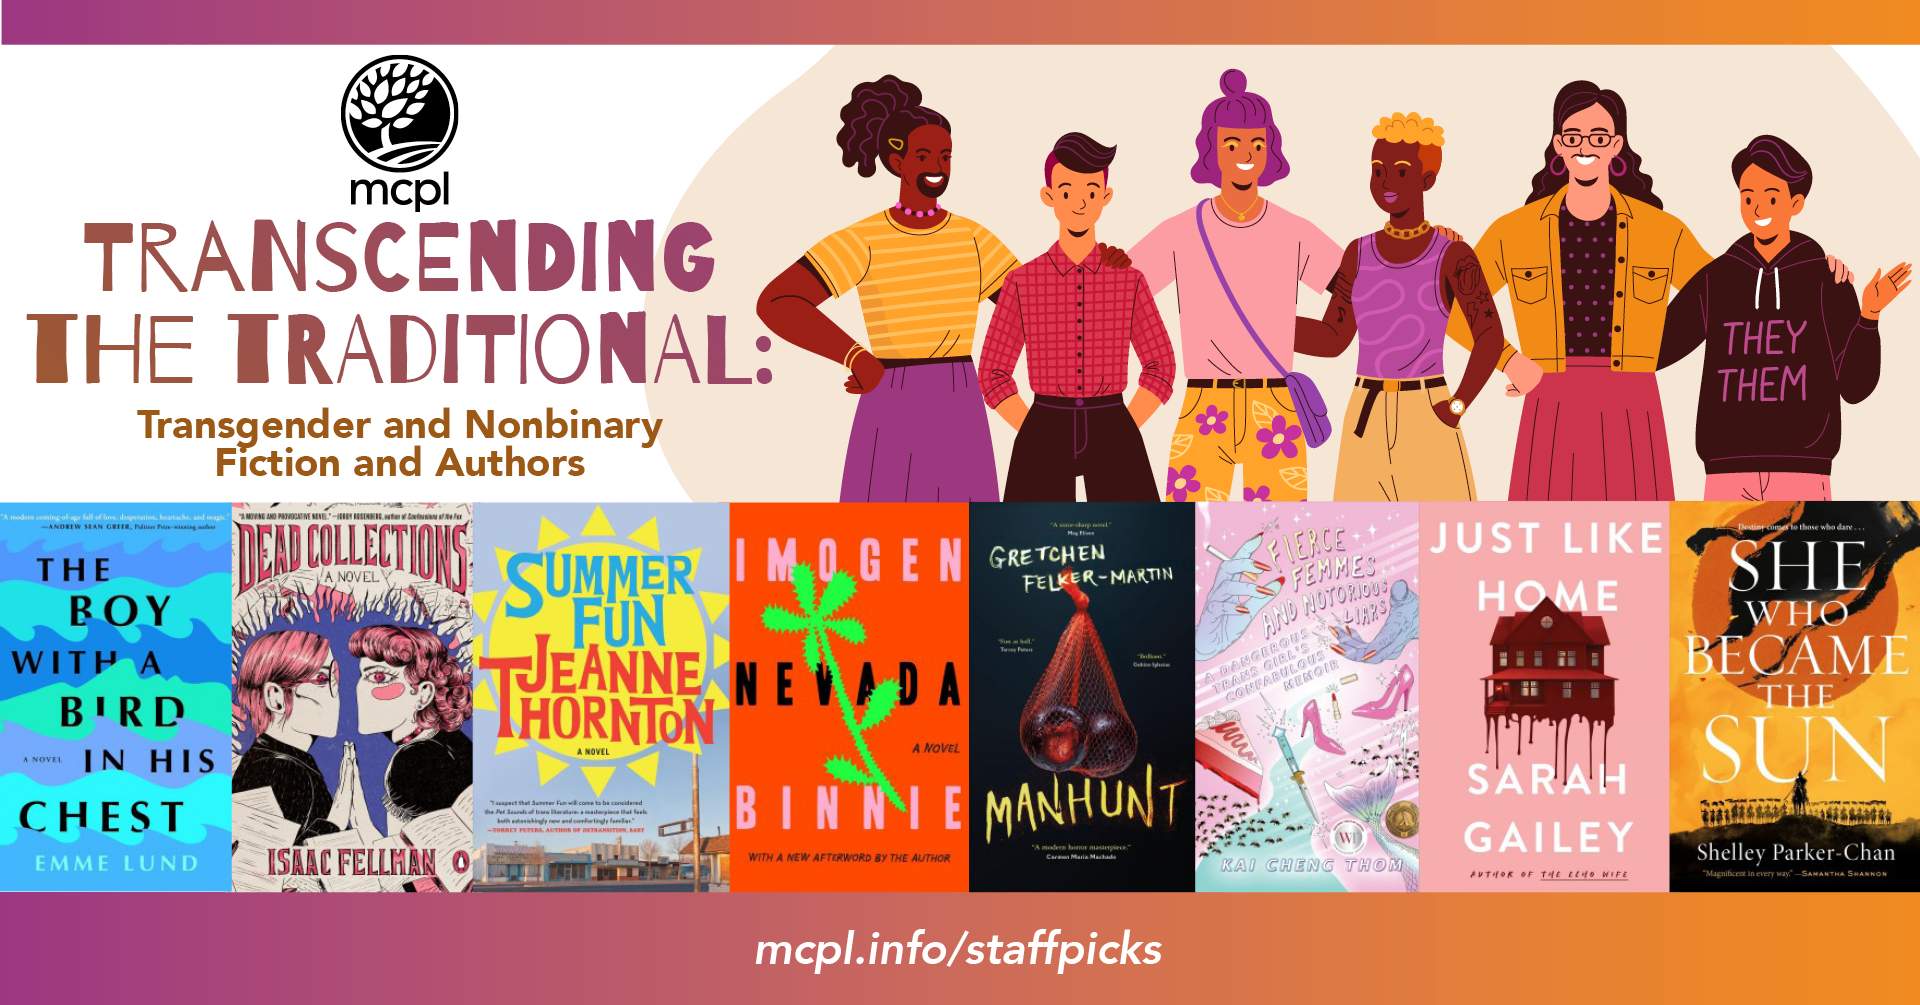 Trancending the Traditional: Transgender and Nonbinary Fiction and Authors